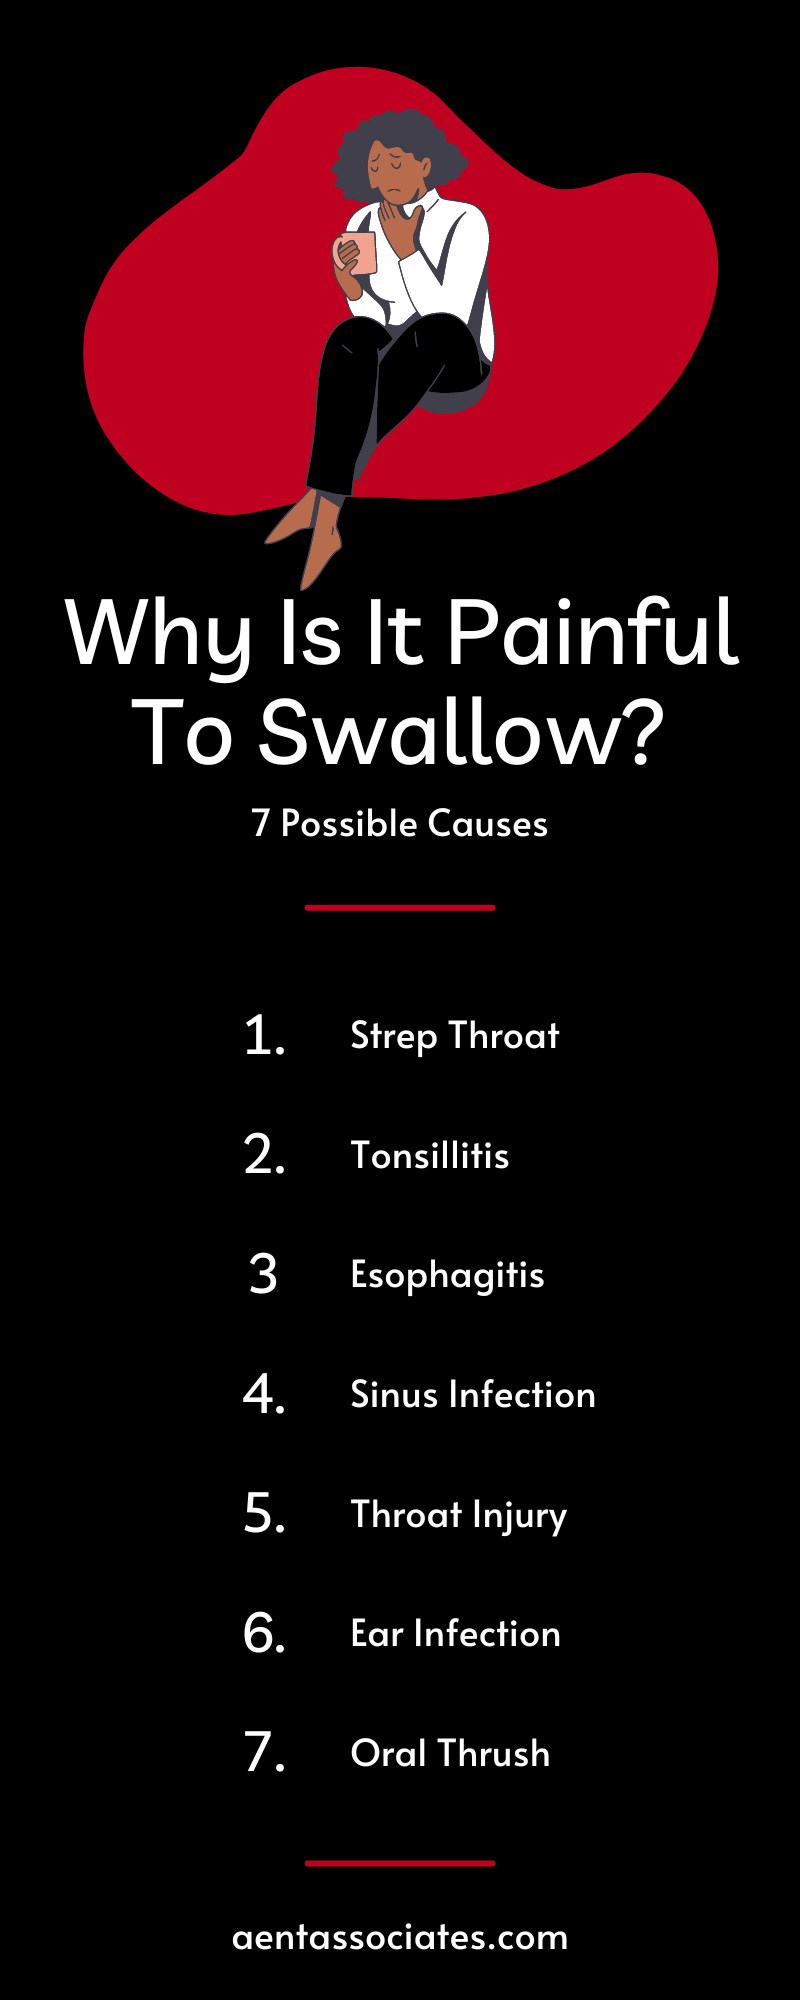 Why Is It Painful To Swallow? 7 Possible Causes